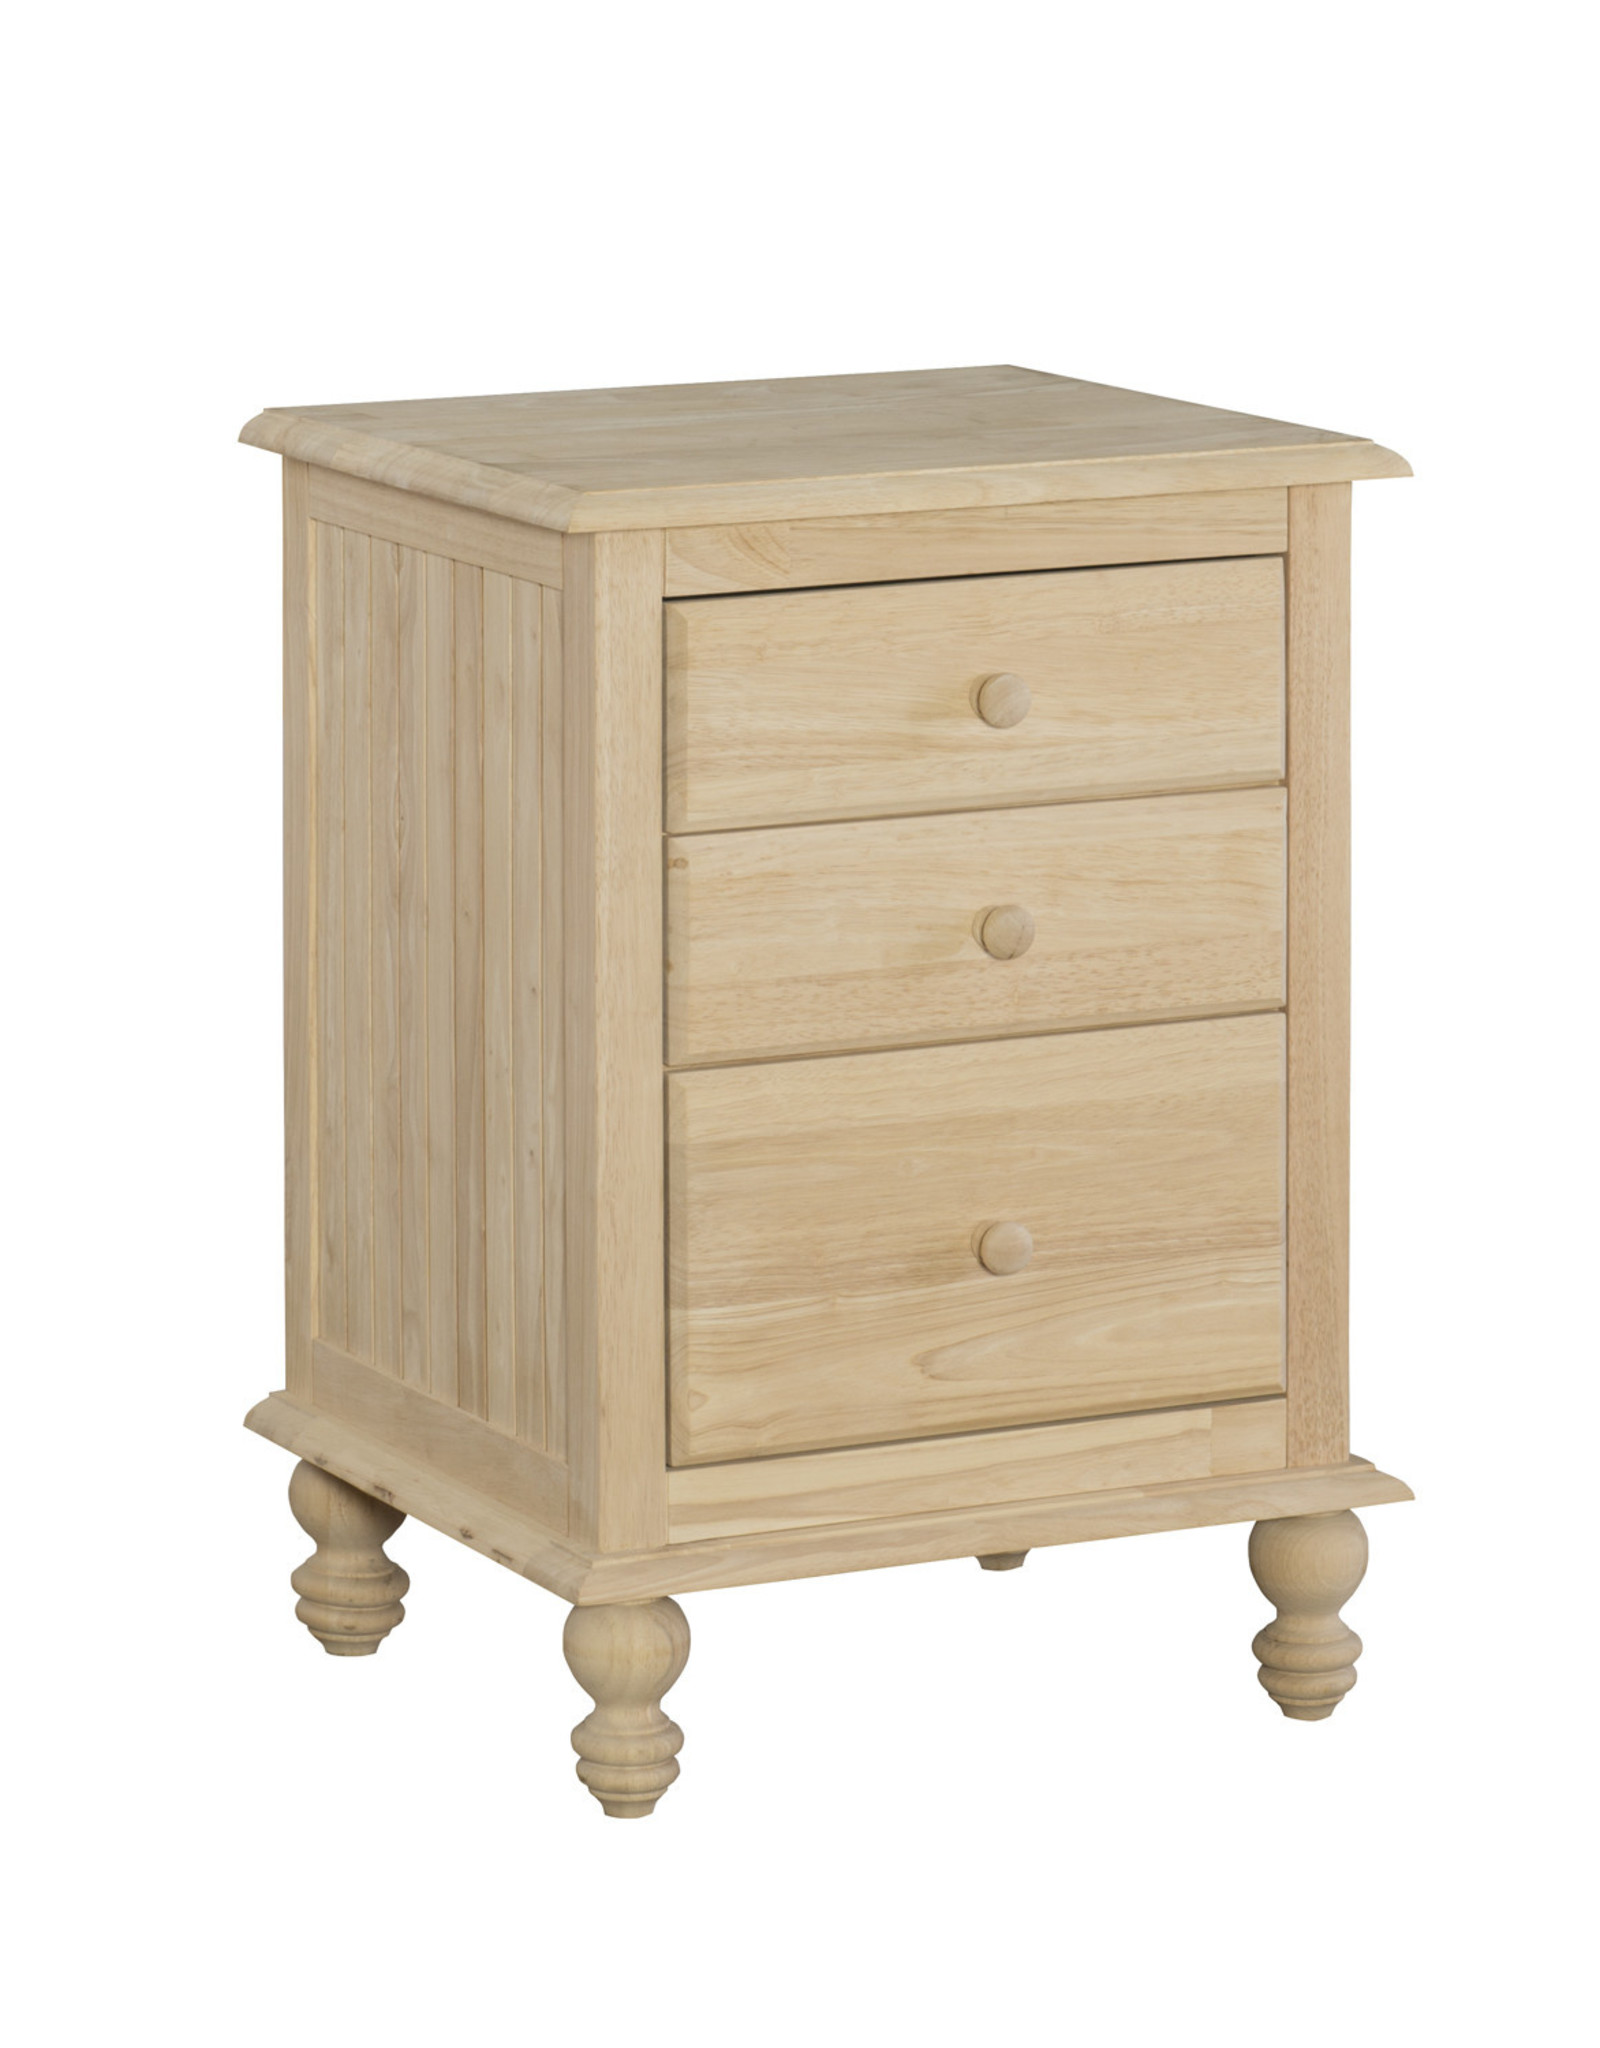 Whitewood Cottage 3 Drawer Nightstand - Unfinished